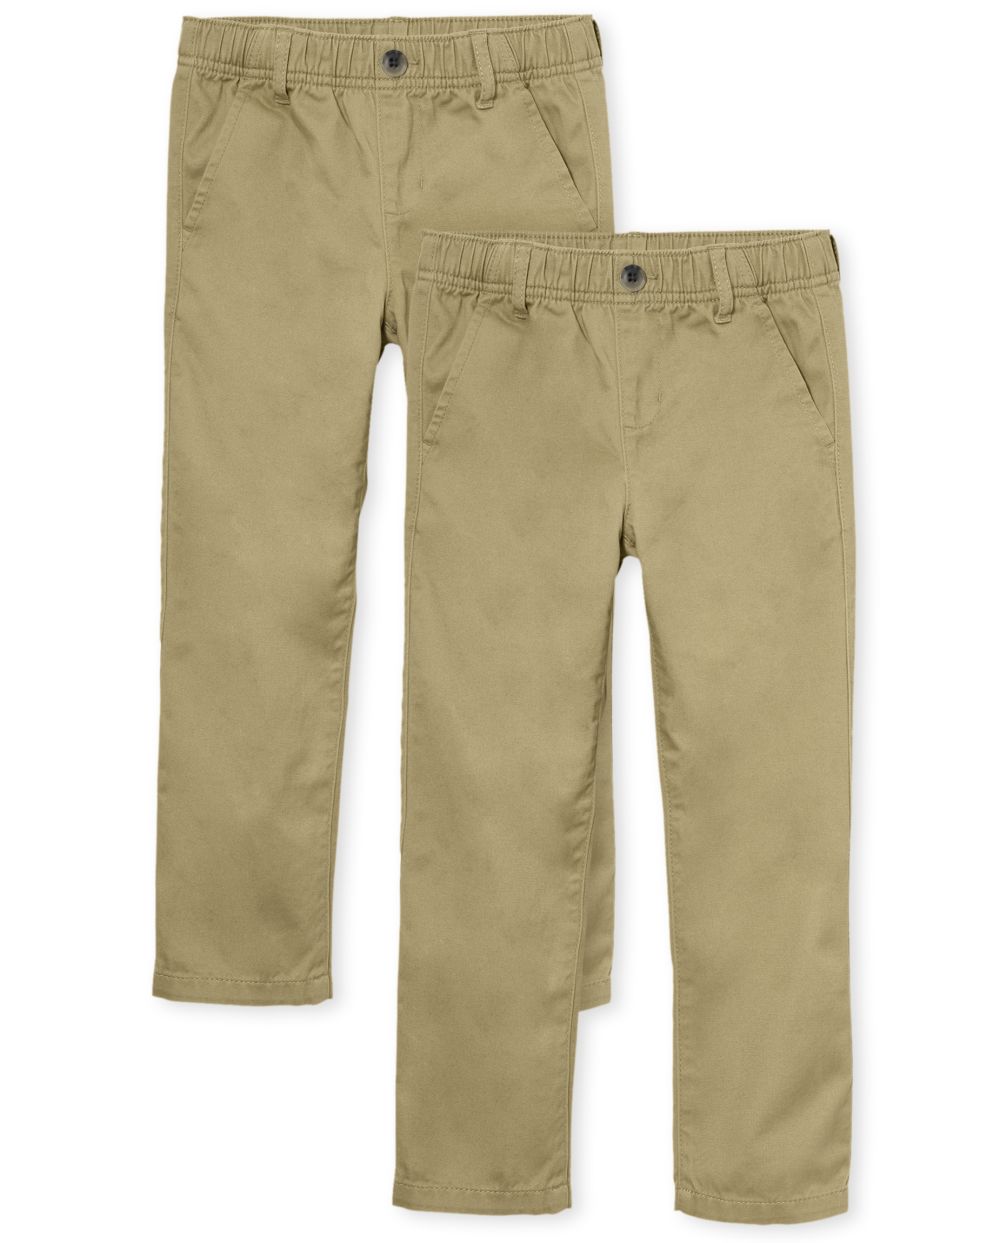 The Children's Place Boys Uniform Stretch Pull On Chino Pants 2-Pack - Tan - 16H